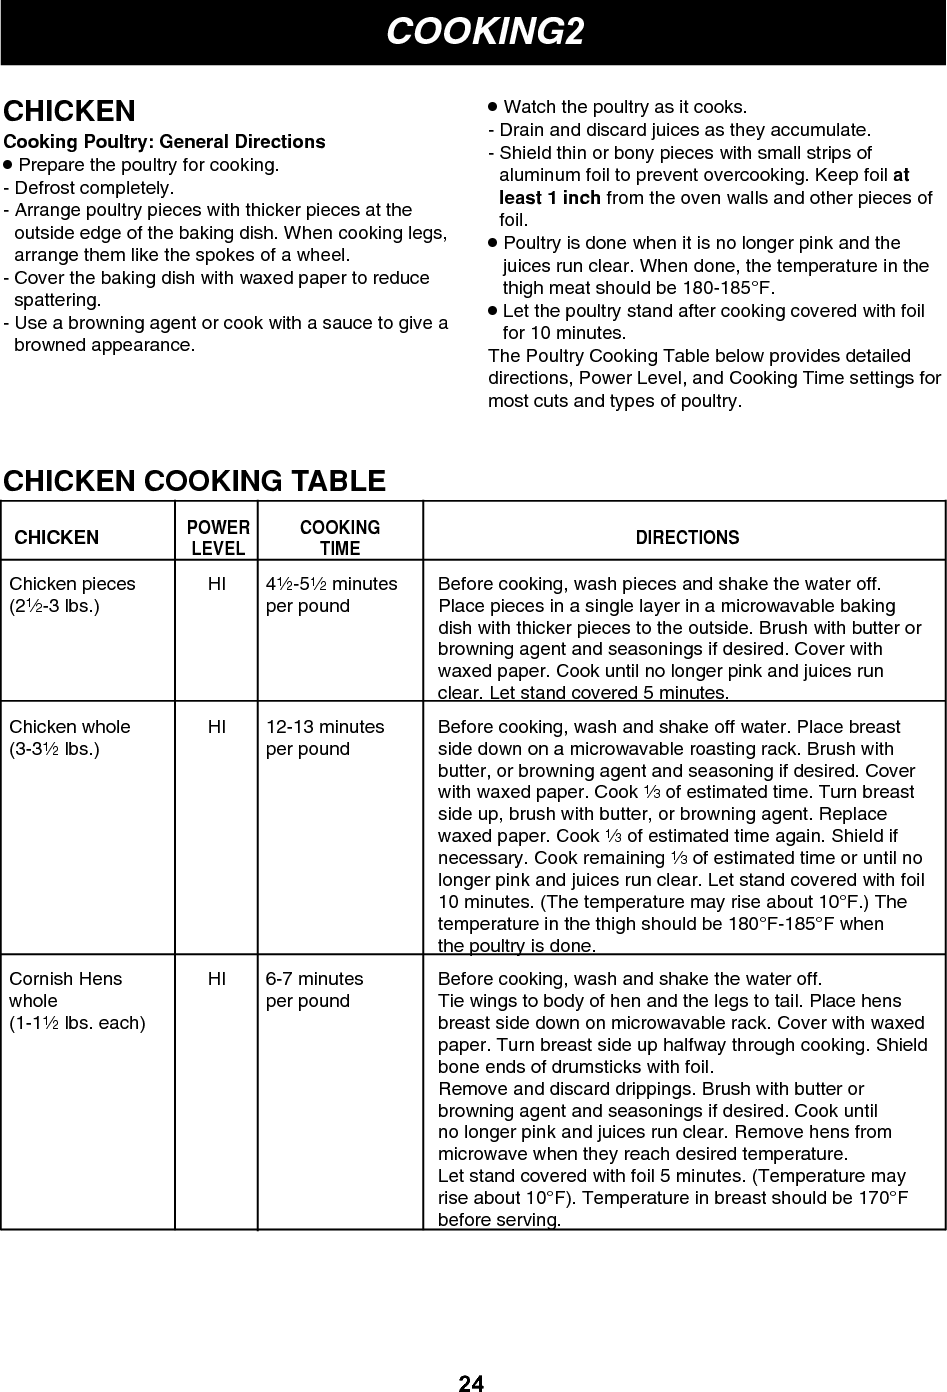 COOKING224CHICKENCooking Poultry: General Directions●Prepare the poultry for cooking.- Defrost completely.- Arrange poultry pieces with thicker pieces at theoutside edge of the baking dish. When cooking legs,arrange them like the spokes of a wheel.- Cover the baking dish with waxed paper to reducespattering.- Use a browning agent or cook with a sauce to give abrowned appearance.●Watch the poultry as it cooks.- Drain and discard juices as they accumulate.- Shield thin or bony pieces with small strips ofaluminum foil to prevent overcooking. Keep foil atleast 1 inch from the oven walls and other pieces offoil.●Poultry is done when it is no longer pink and thejuices run clear. When done, the temperature in thethigh meat should be 180-185°F.●Let the poultry stand after cooking covered with foilfor 10 minutes.The Poultry Cooking Table below provides detaileddirections, Power Level, and Cooking Time settings formost cuts and types of poultry.CHICKEN COOKING TABLECHICKENChicken pieces(21⁄2-3 lbs.)Chicken whole(3-31⁄2lbs.)Cornish Henswhole(1-11⁄2lbs. each)HIHIHI41⁄2-51⁄2minutesper pound12-13 minutesper pound6-7 minutesper poundBefore cooking, wash pieces and shake the water off.Place pieces in a single layer in a microwavable bakingdish with thicker pieces to the outside. Brush with butter orbrowning agent and seasonings if desired. Cover withwaxed paper. Cook until no longer pink and juices runclear. Let stand covered 5 minutes.Before cooking, wash and shake off water. Place breastside down on a microwavable roasting rack. Brush withbutter, or browning agent and seasoning if desired. Coverwith waxed paper. Cook 1⁄3of estimated time. Turn breastside up, brush with butter, or browning agent. Replacewaxed paper. Cook 1⁄3of estimated time again. Shield ifnecessary. Cook remaining 1⁄3of estimated time or until nolonger pink and juices run clear. Let stand covered with foil10 minutes. (The temperature may rise about 10°F.) Thetemperature in the thigh should be 180°F-185°F whenthe poultry is done.Before cooking, wash and shake the water off.Tie wings to body of hen and the legs to tail. Place hensbreast side down on microwavable rack. Cover with waxedpaper. Turn breast side up halfway through cooking. Shieldbone ends of drumsticks with foil.Remove and discard drippings. Brush with butter orbrowning agent and seasonings if desired. Cook untilno longer pink and juices run clear. Remove hens frommicrowave when they reach desired temperature.Let stand covered with foil 5 minutes. (Temperature mayrise about 10°F). Temperature in breast should be 170°Fbefore serving.POWERLEVELCOOKINGTIME DIRECTIONS